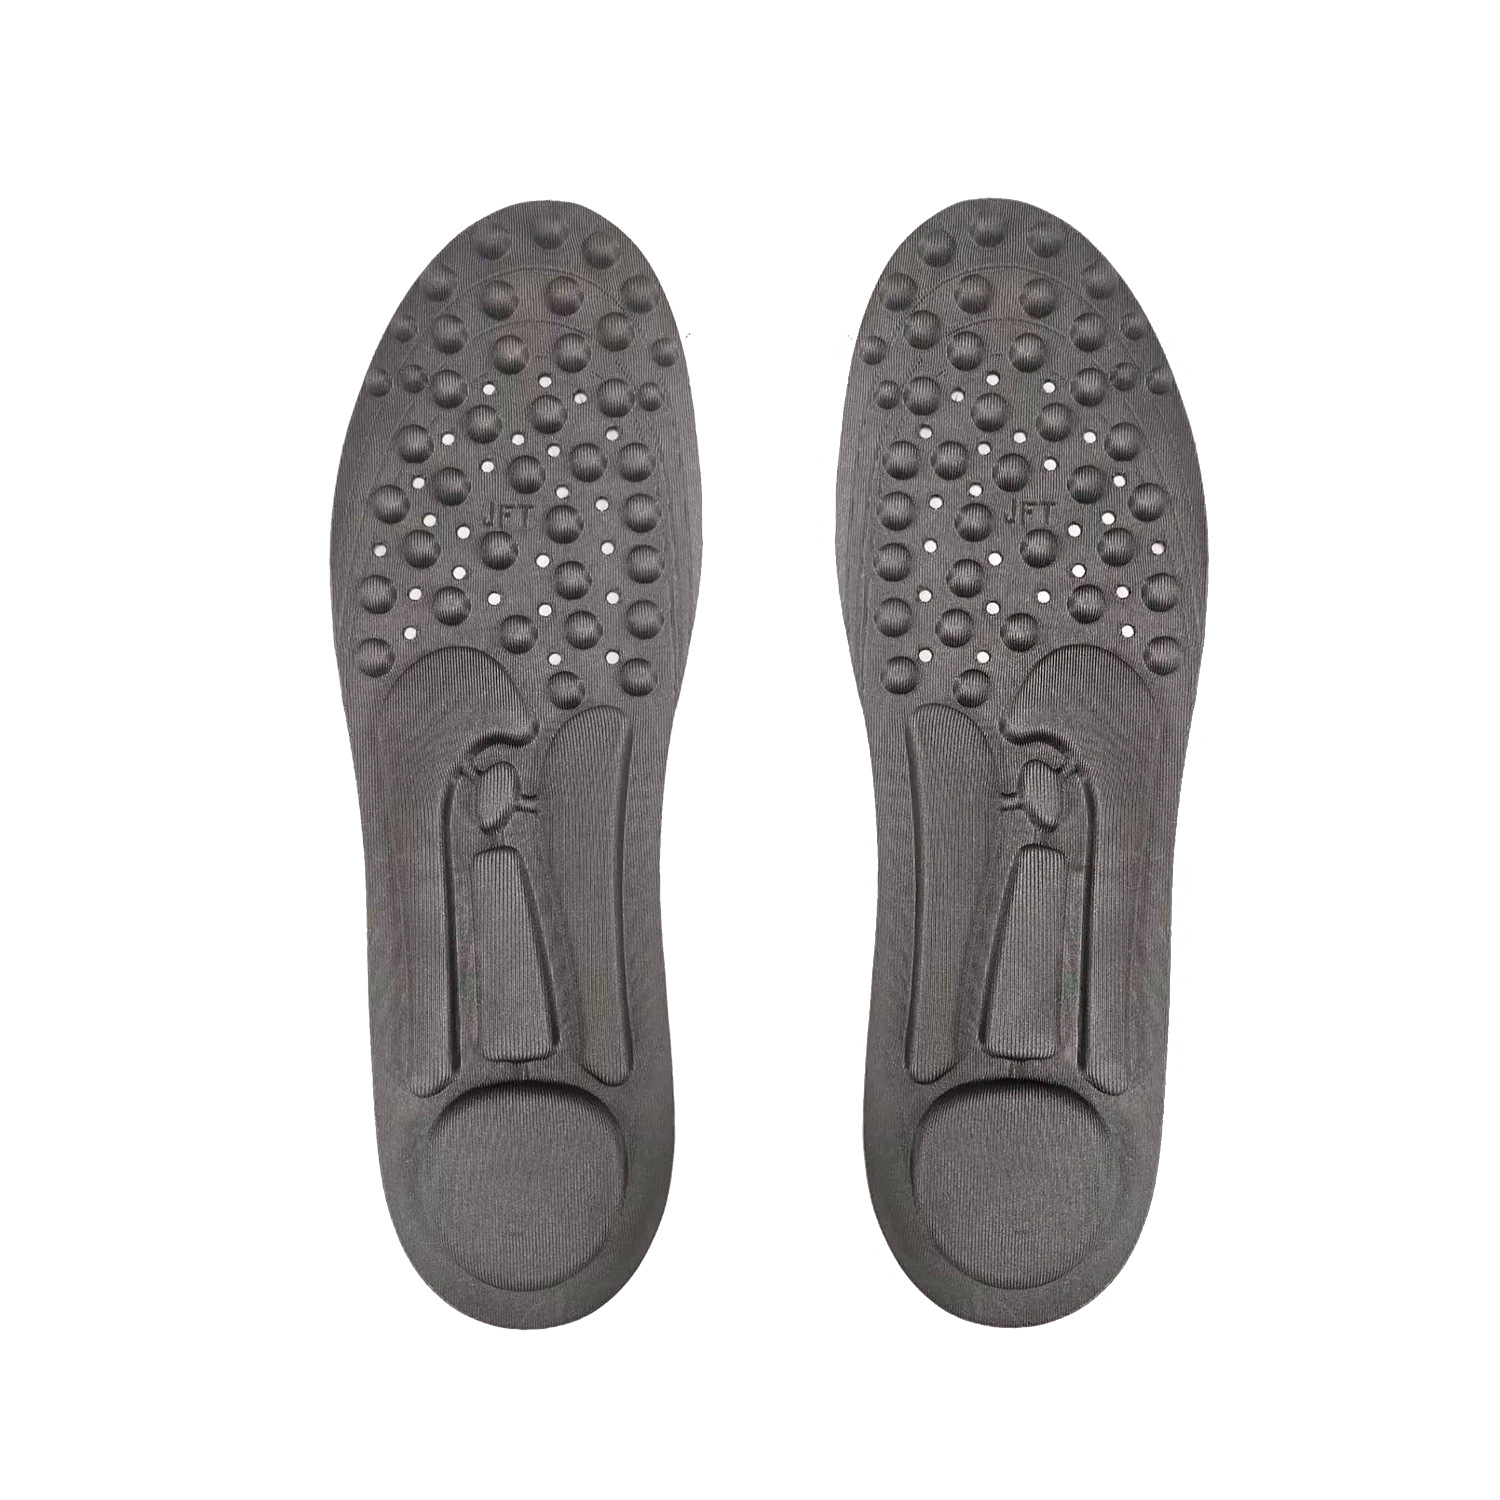 Anti-gravity Massage And Pressure Relief Shoes - CJdropshipping